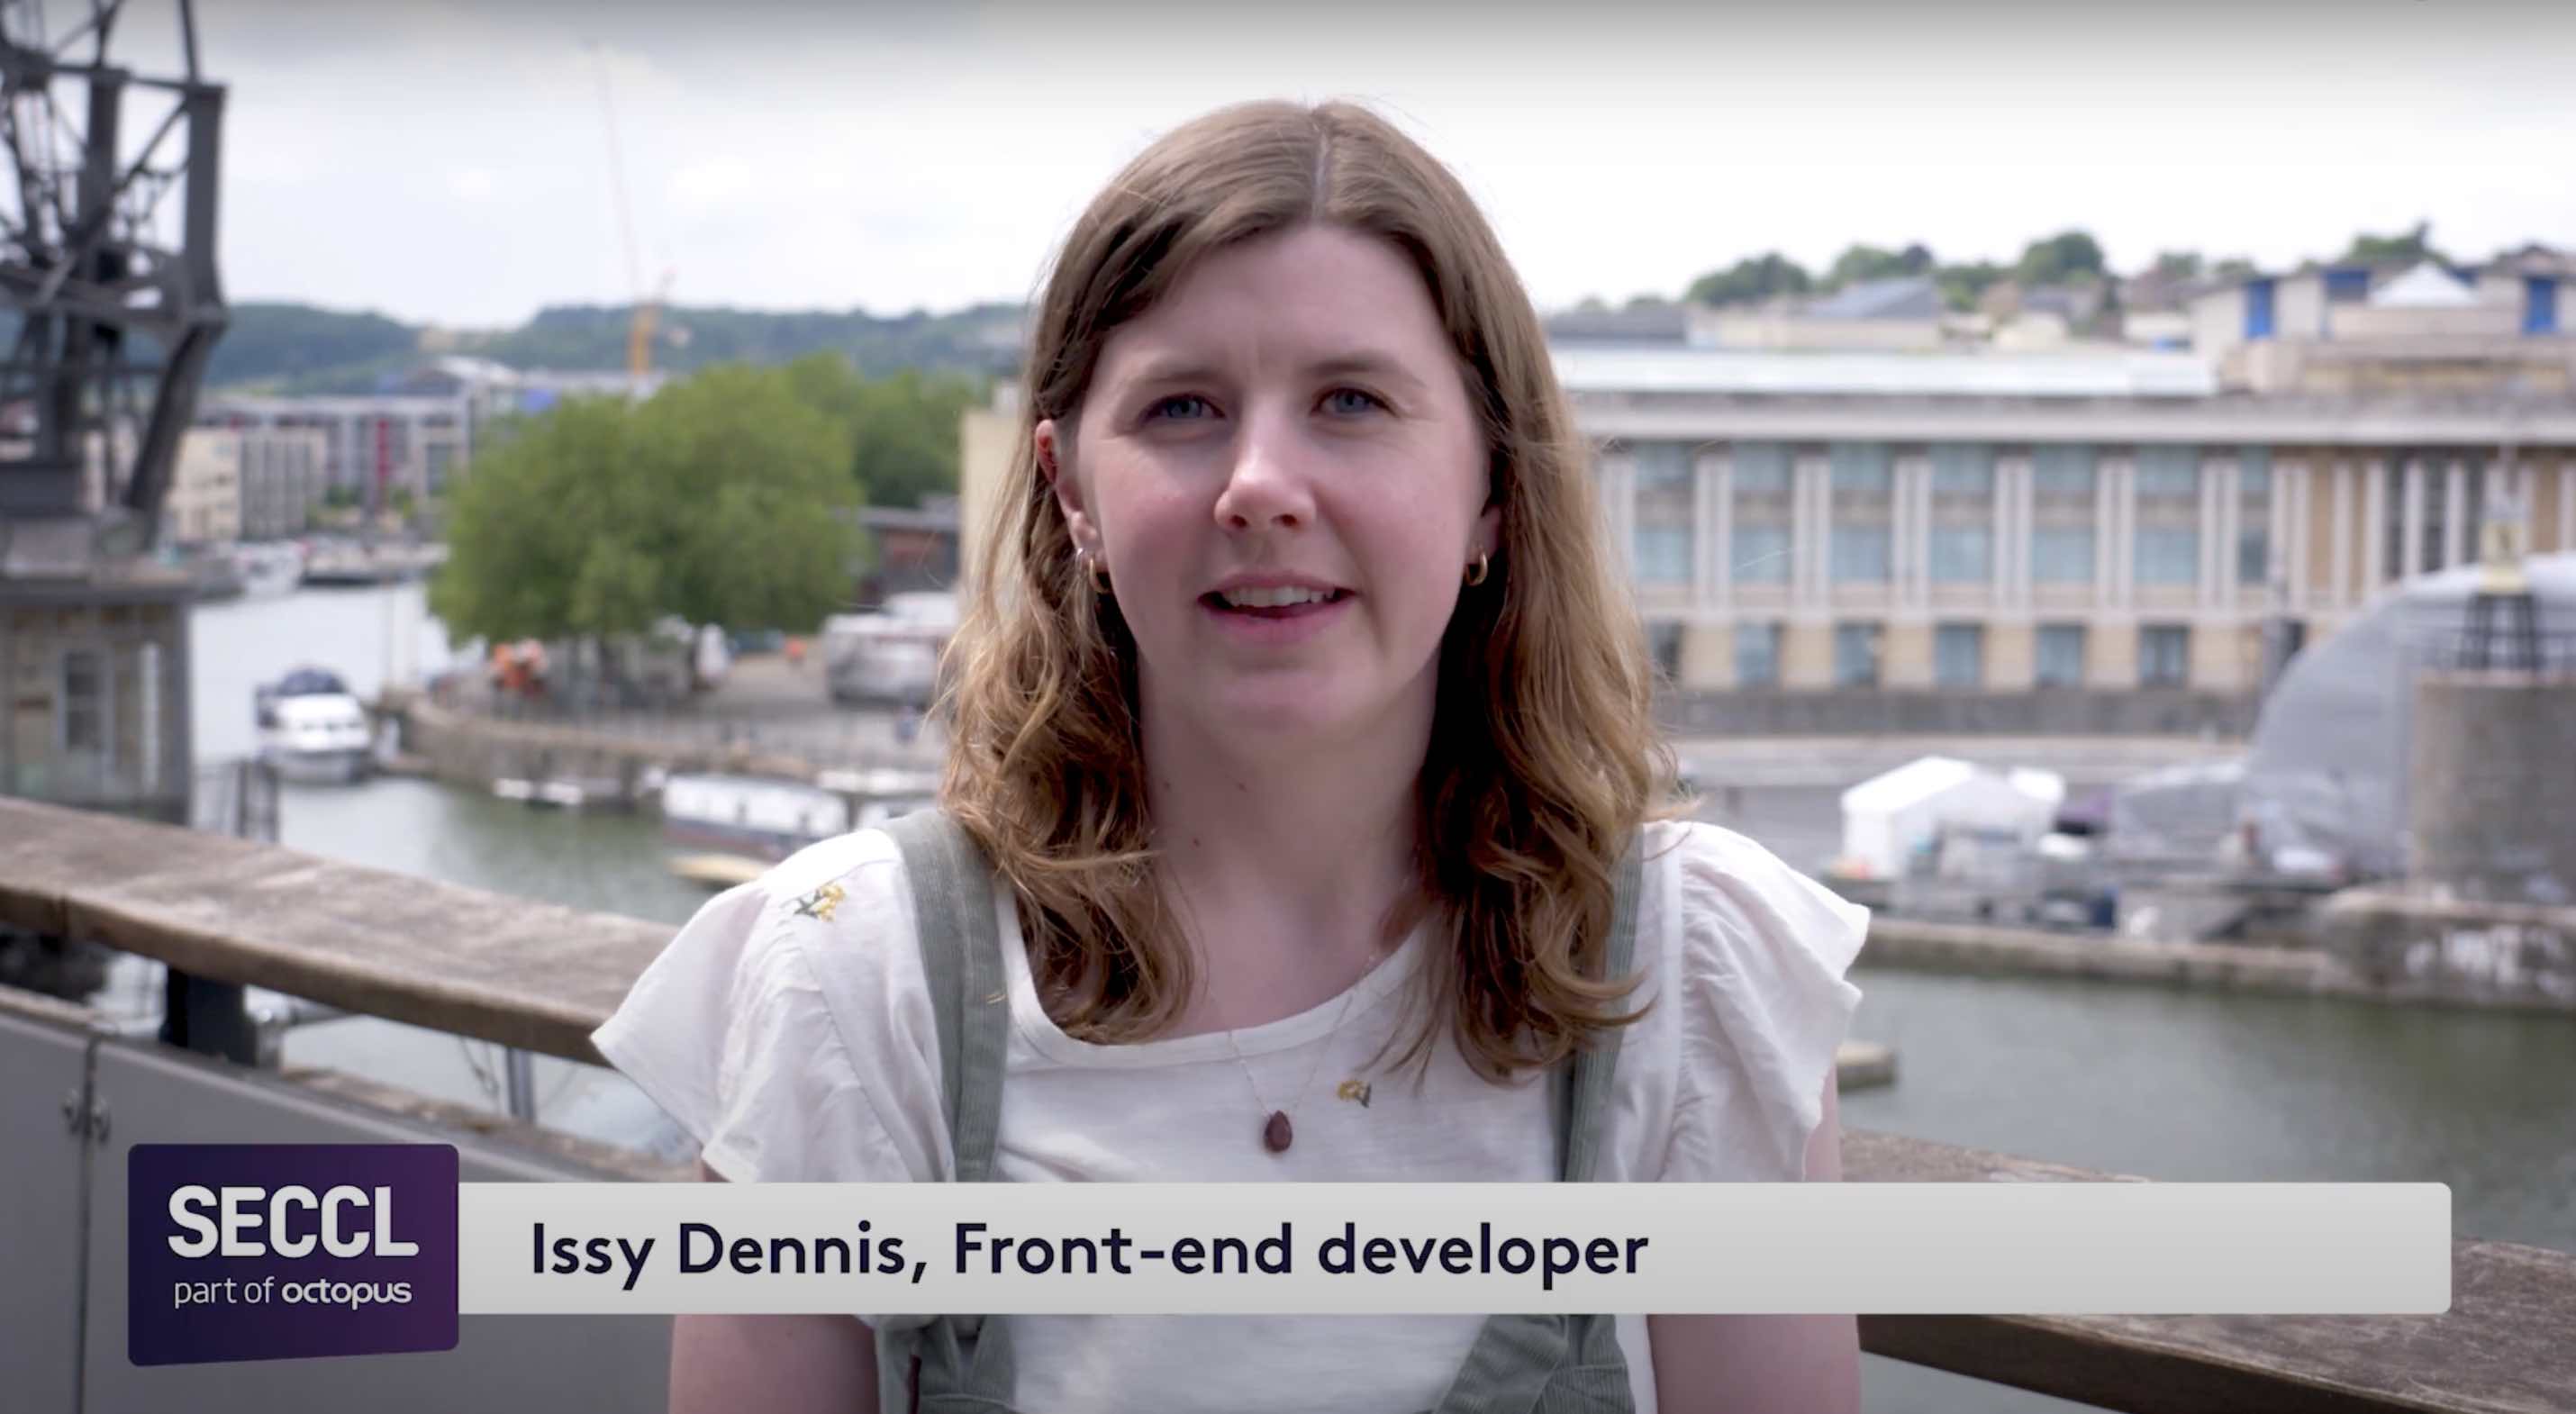 Meet Issy, a front-end developer